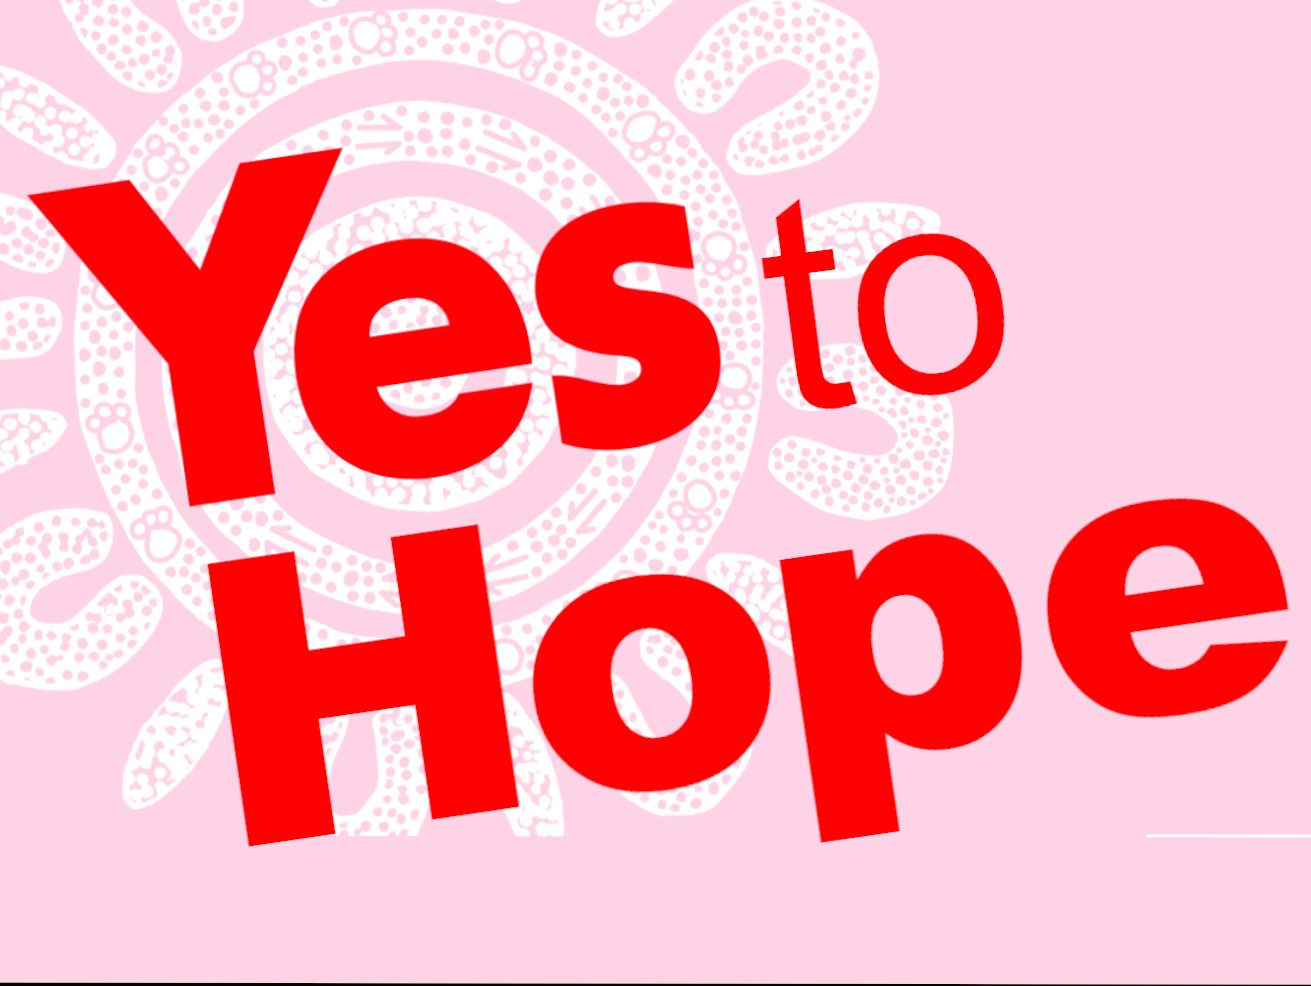 Yes to Hope sign